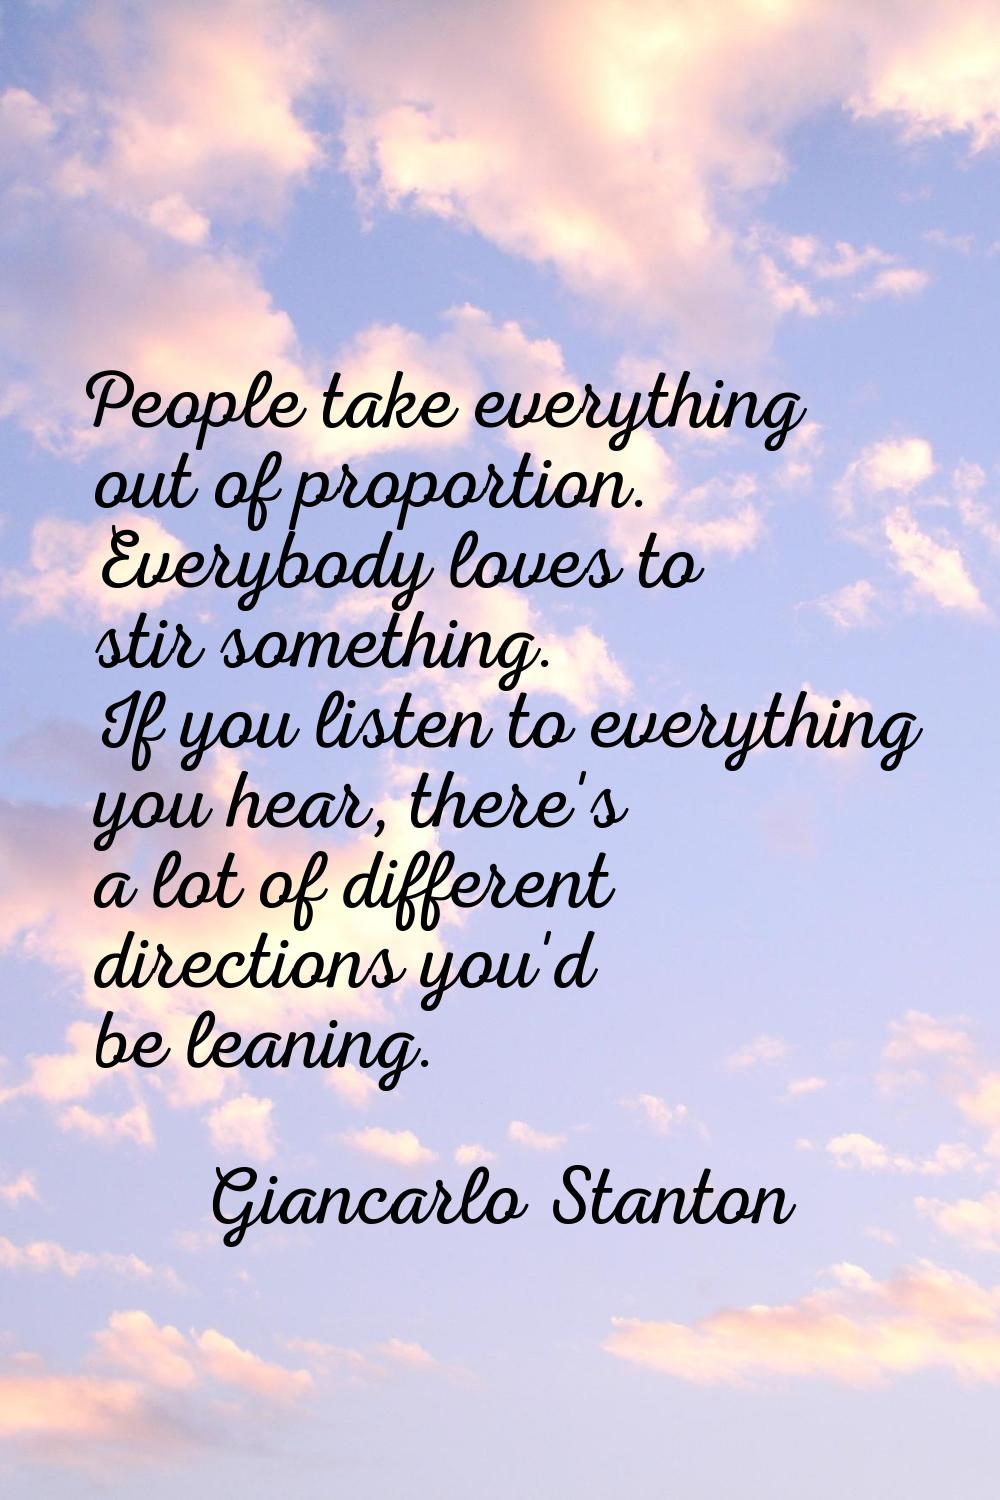 People take everything out of proportion. Everybody loves to stir something. If you listen to every